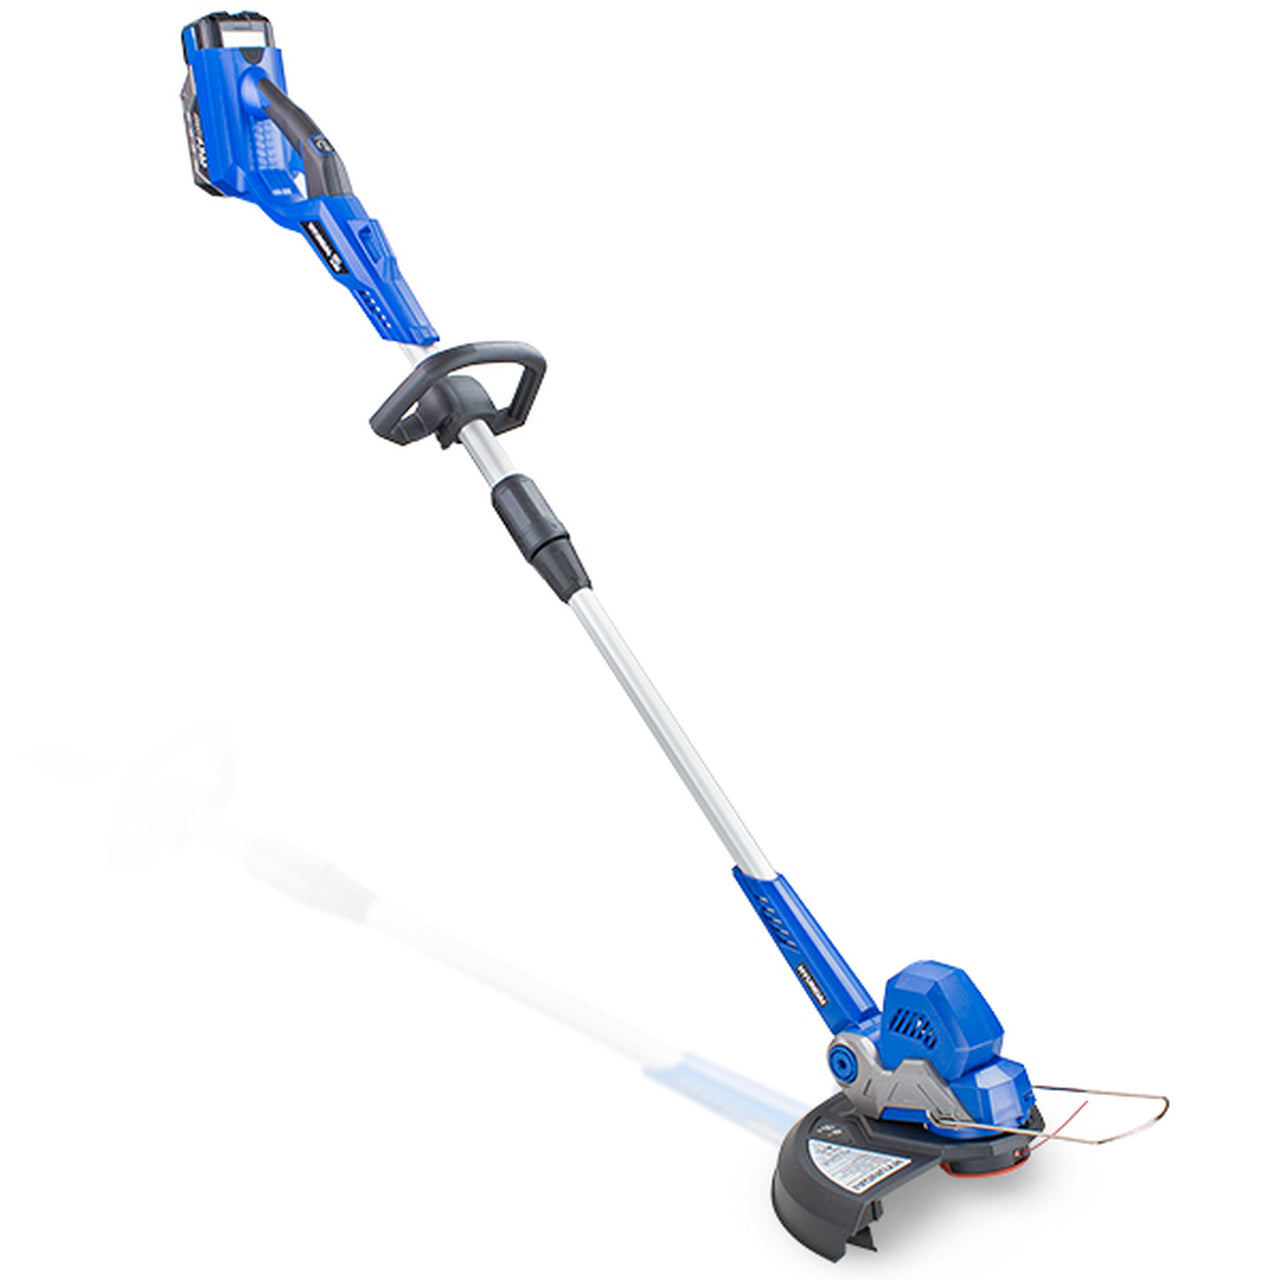 Hyundai-HYTR40LI-40v-Lithium-ion-Cordless-Grass-Trimmer-With-Battery-and-Charger